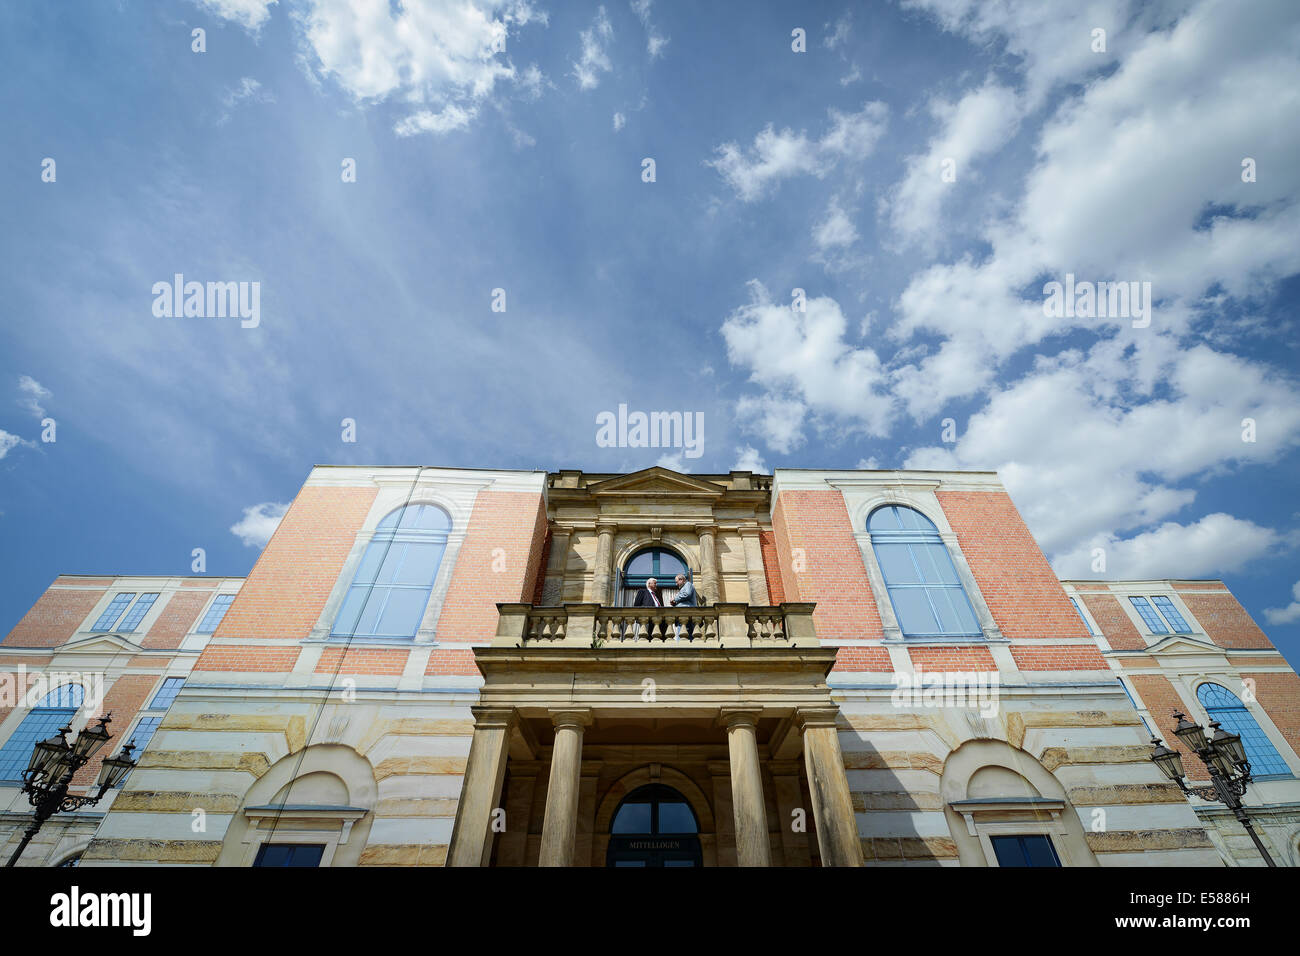 Bayreuth, Germany. 22nd July, 2014. Guests of the final rehearsal stand on the balcony of the Bayreuth Festival Theatre in Bayreuth, Germany, 22 July 2014. Last year the festival presented a new production of 'Der Ring des Nibelungen' (The Ring of the Nibelung) which will run again this year. Photo: DAVID EBENER/dpa/Alamy Live News Stock Photo